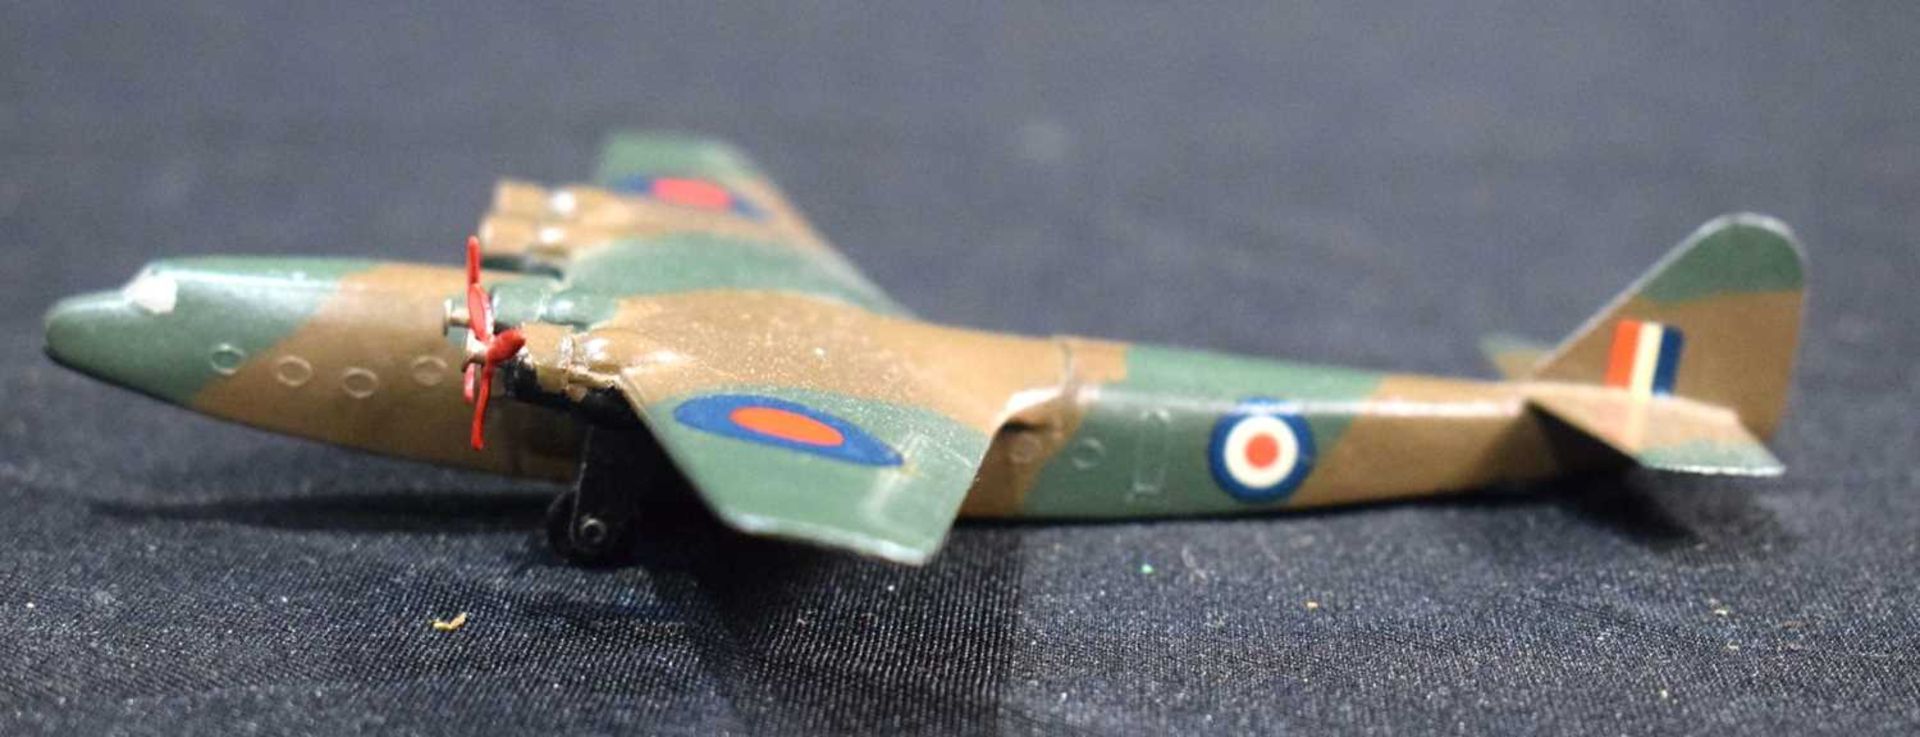 A Dinky Meccano Armstrong Whitworth model Airliner 15.5 x 17 cm. - Image 3 of 3